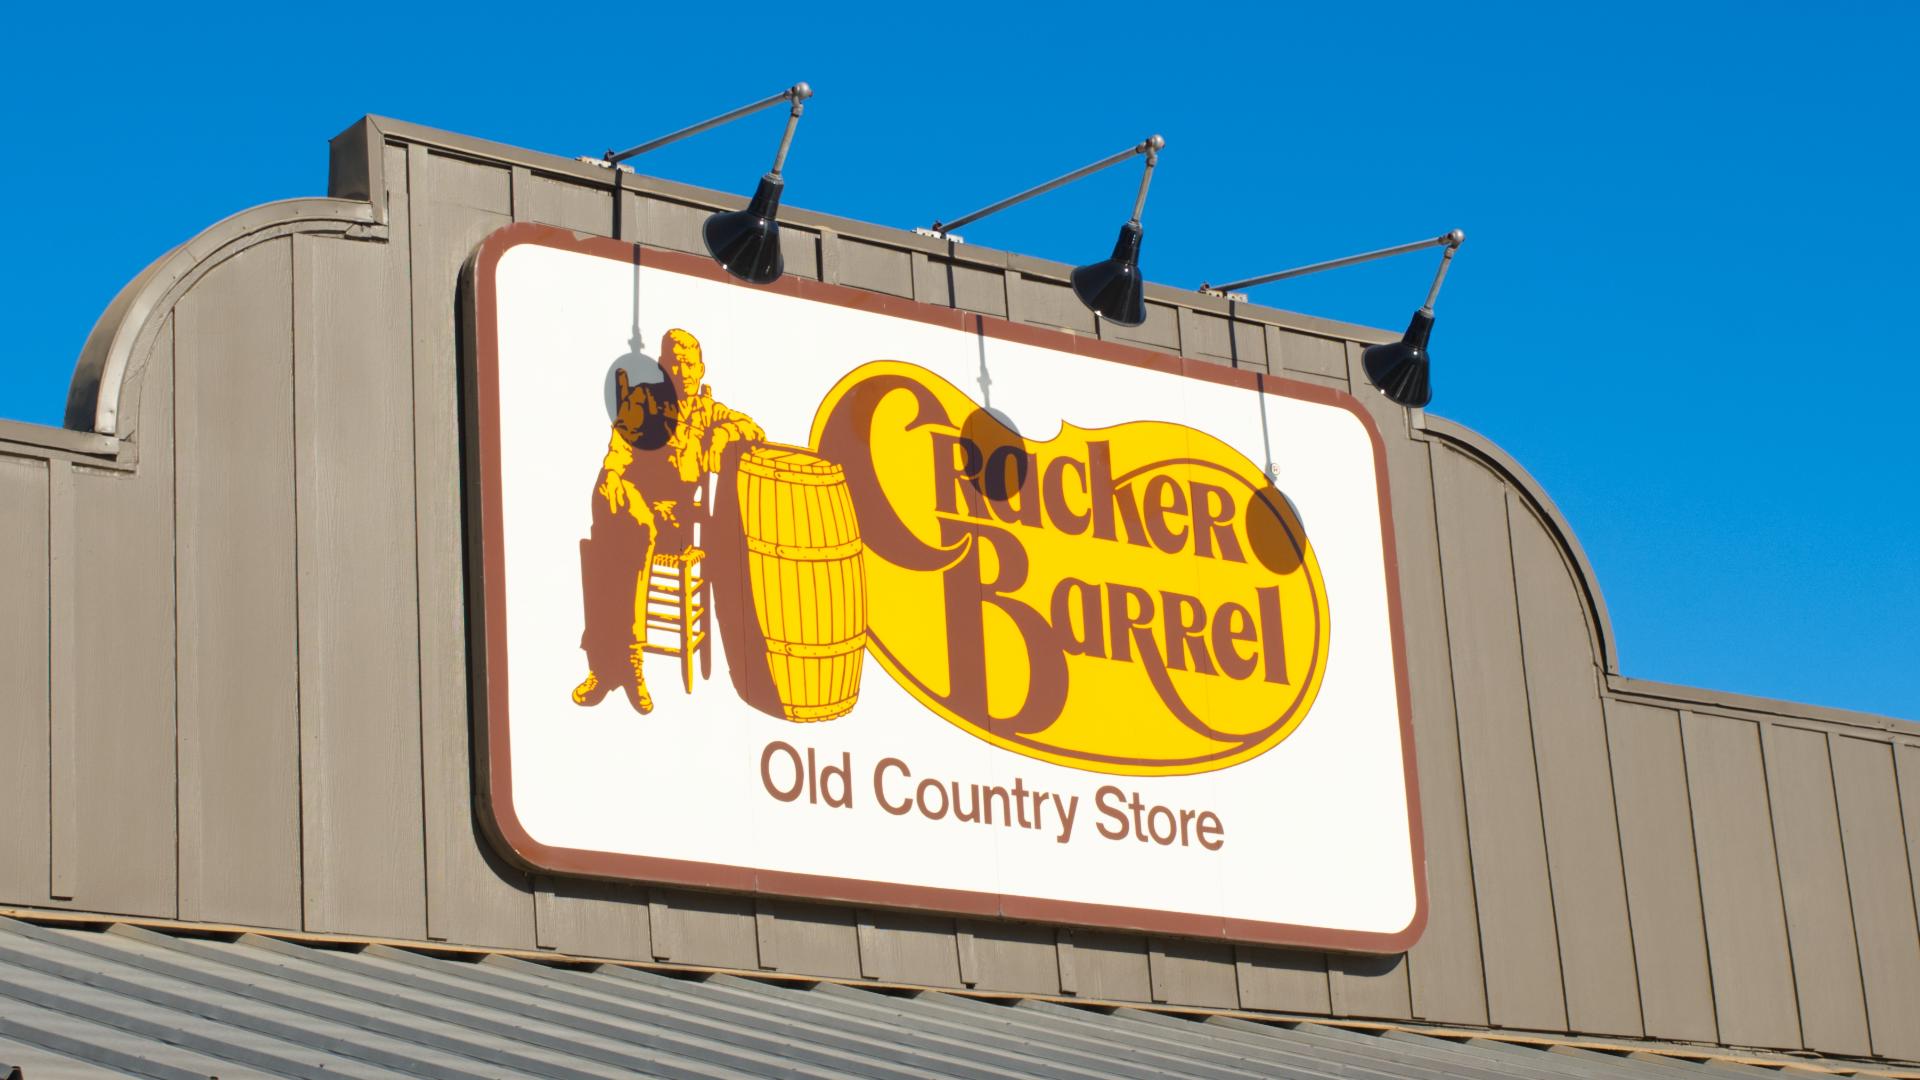 Cracker Barrel's CEO said the restaurant chain has "lost its shine" and there is a new strategic plan to transform the company.